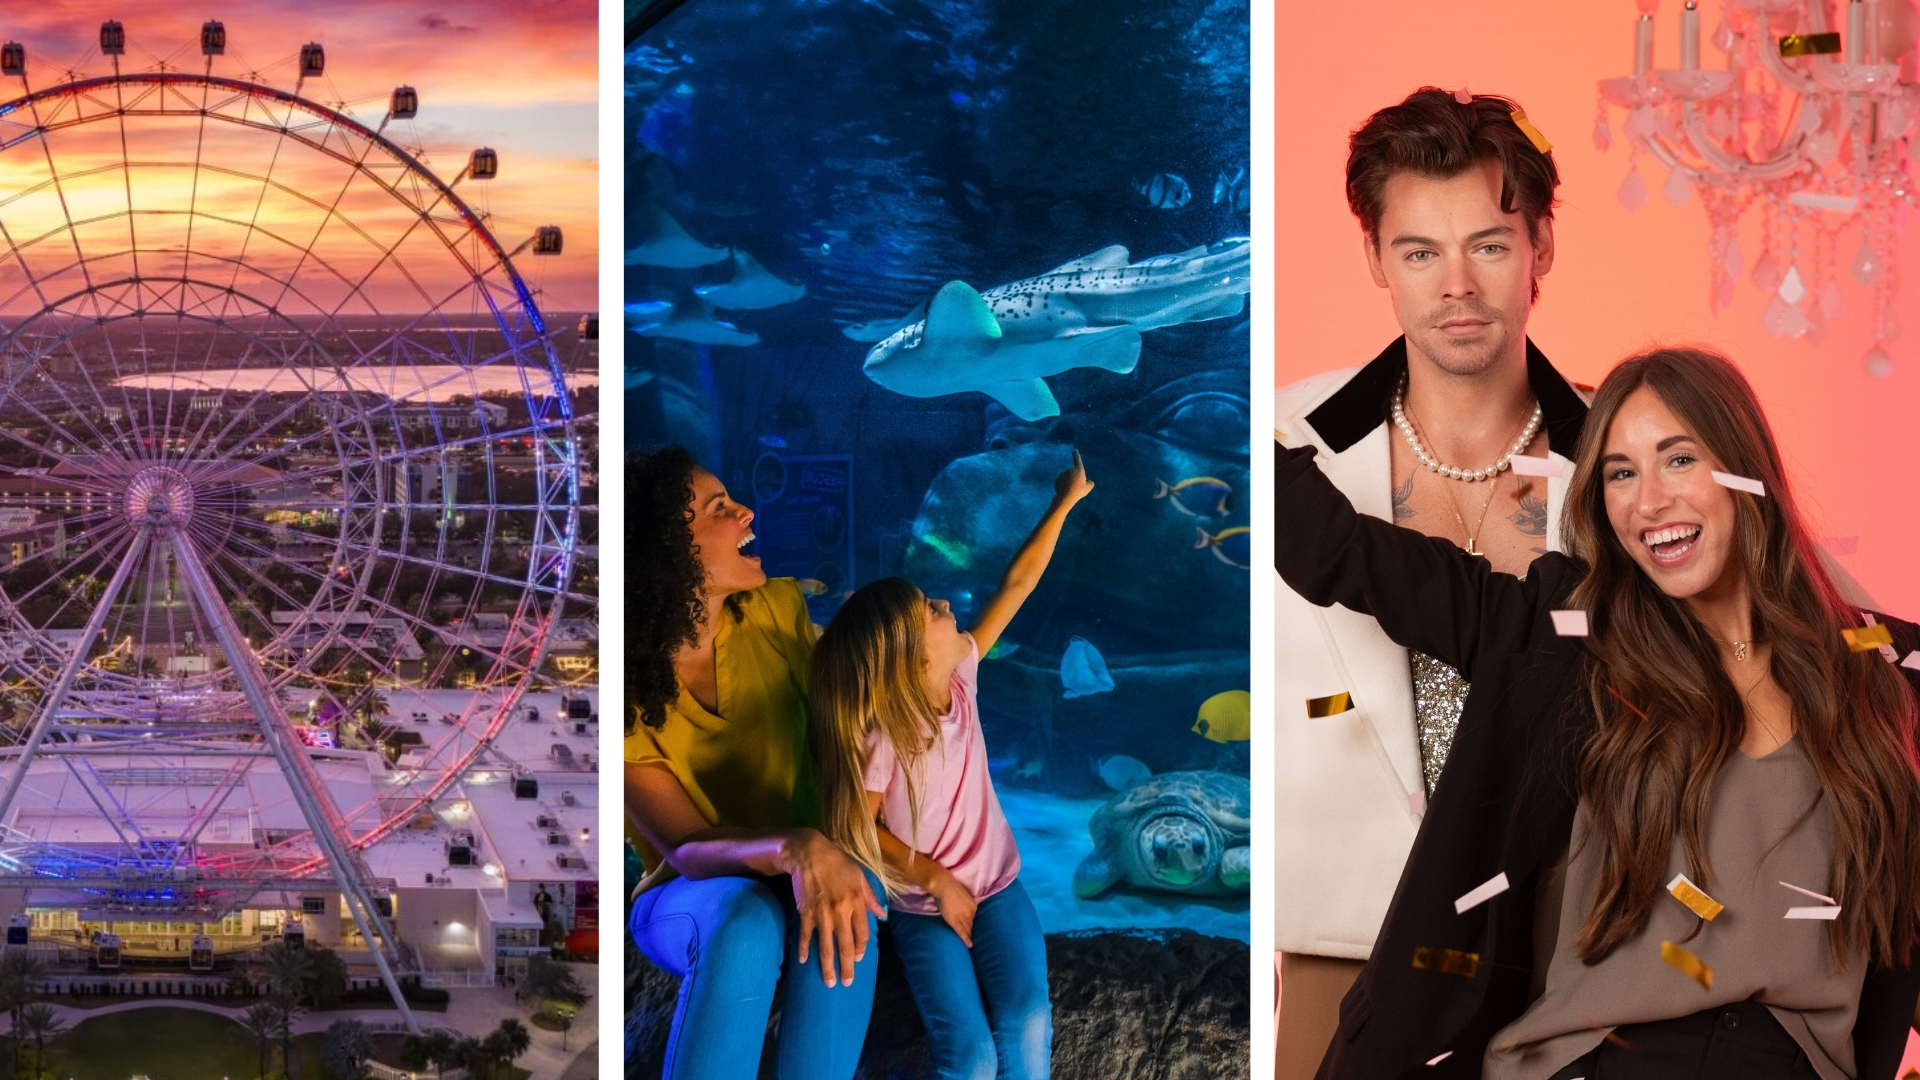 Mashh up of Images displaying an aerial view of The Orlando Eye, Guests looking at a Zebra shark at SEA LIFE Aquarium and Madame Tussauds' Orlando wax Harry Styles 